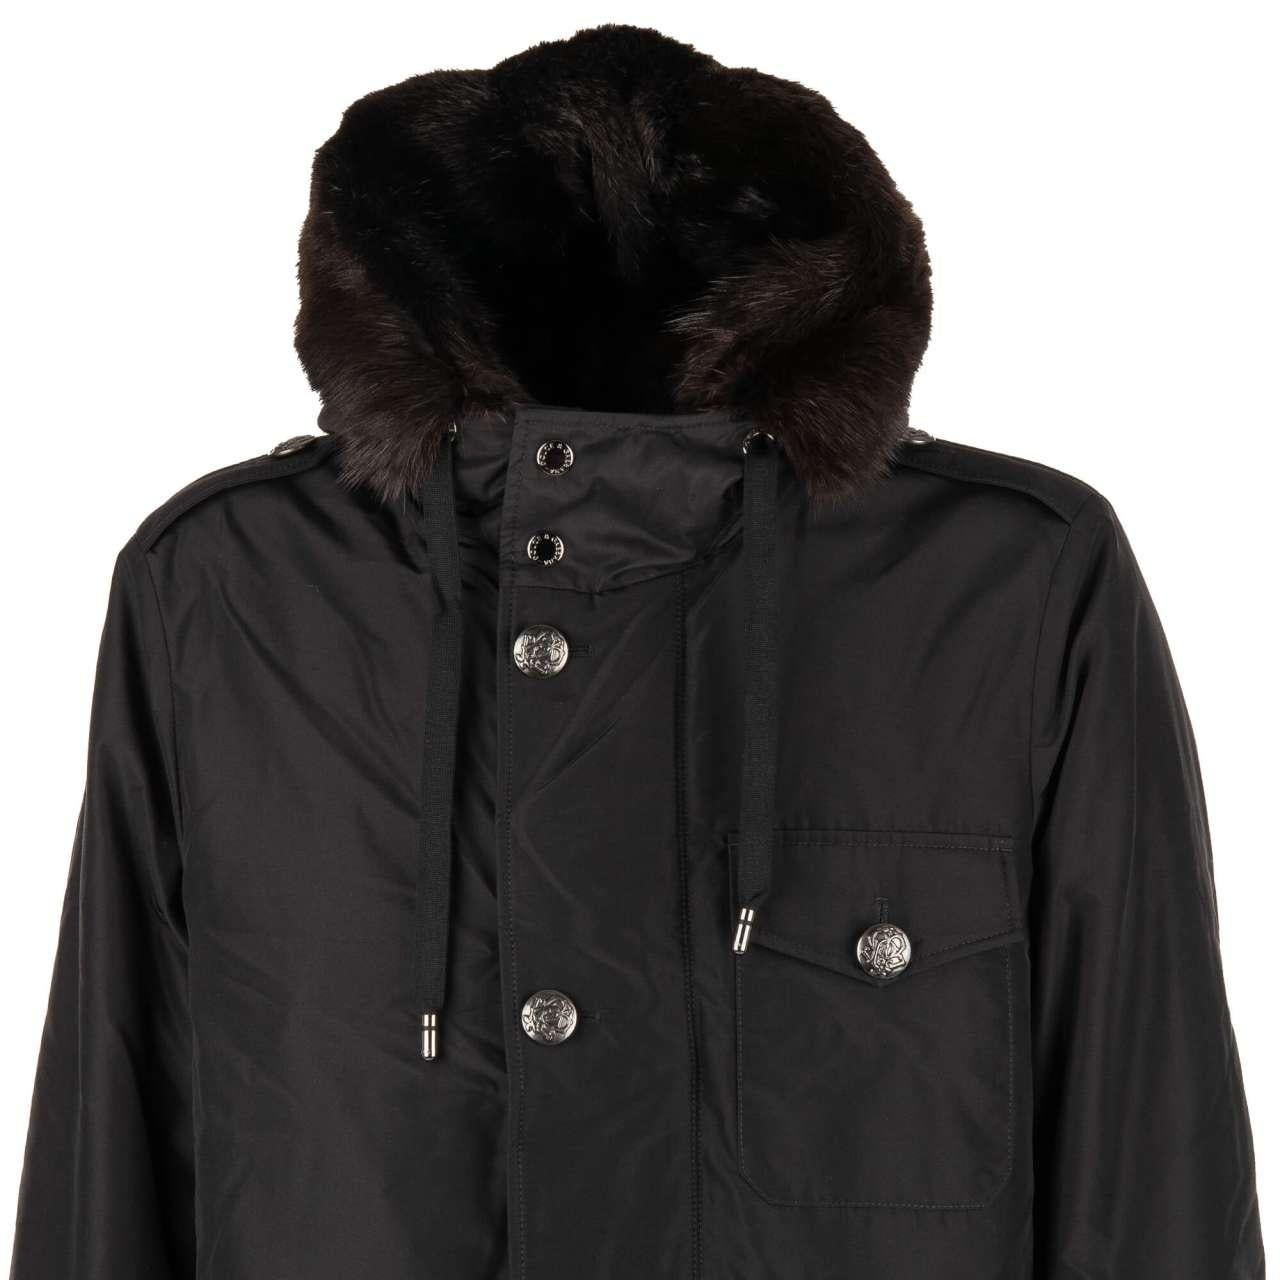 Dolce & Gabbana Silk Parka Jacket with Detachable Fur Lining and Hoody Black 50 For Sale 5